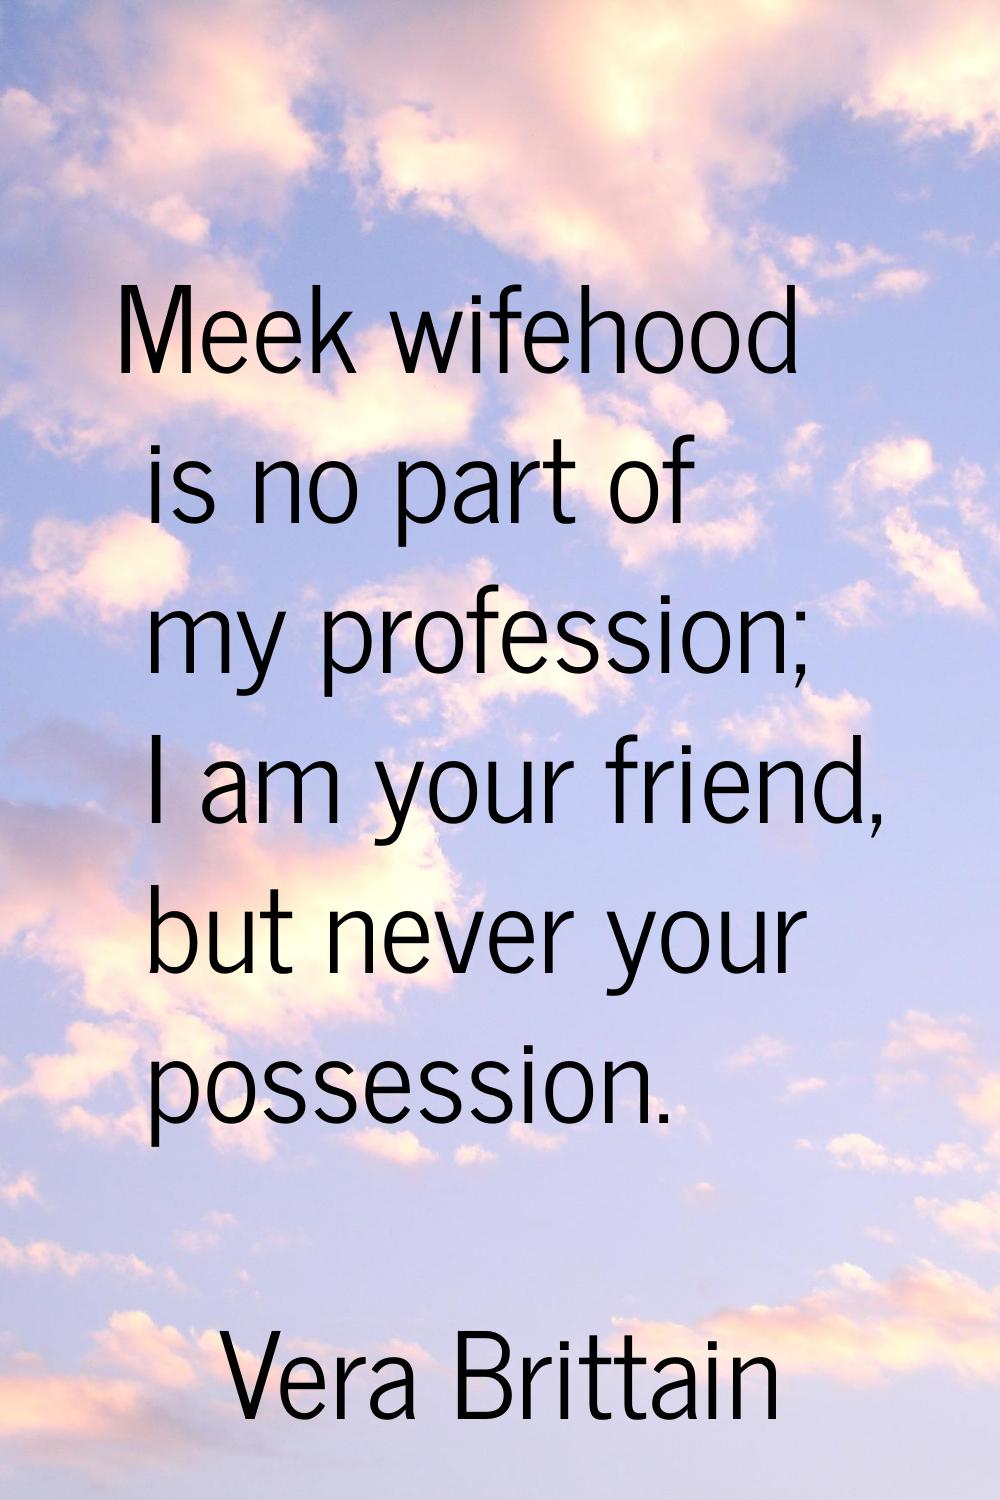 Meek wifehood is no part of my profession; I am your friend, but never your possession.